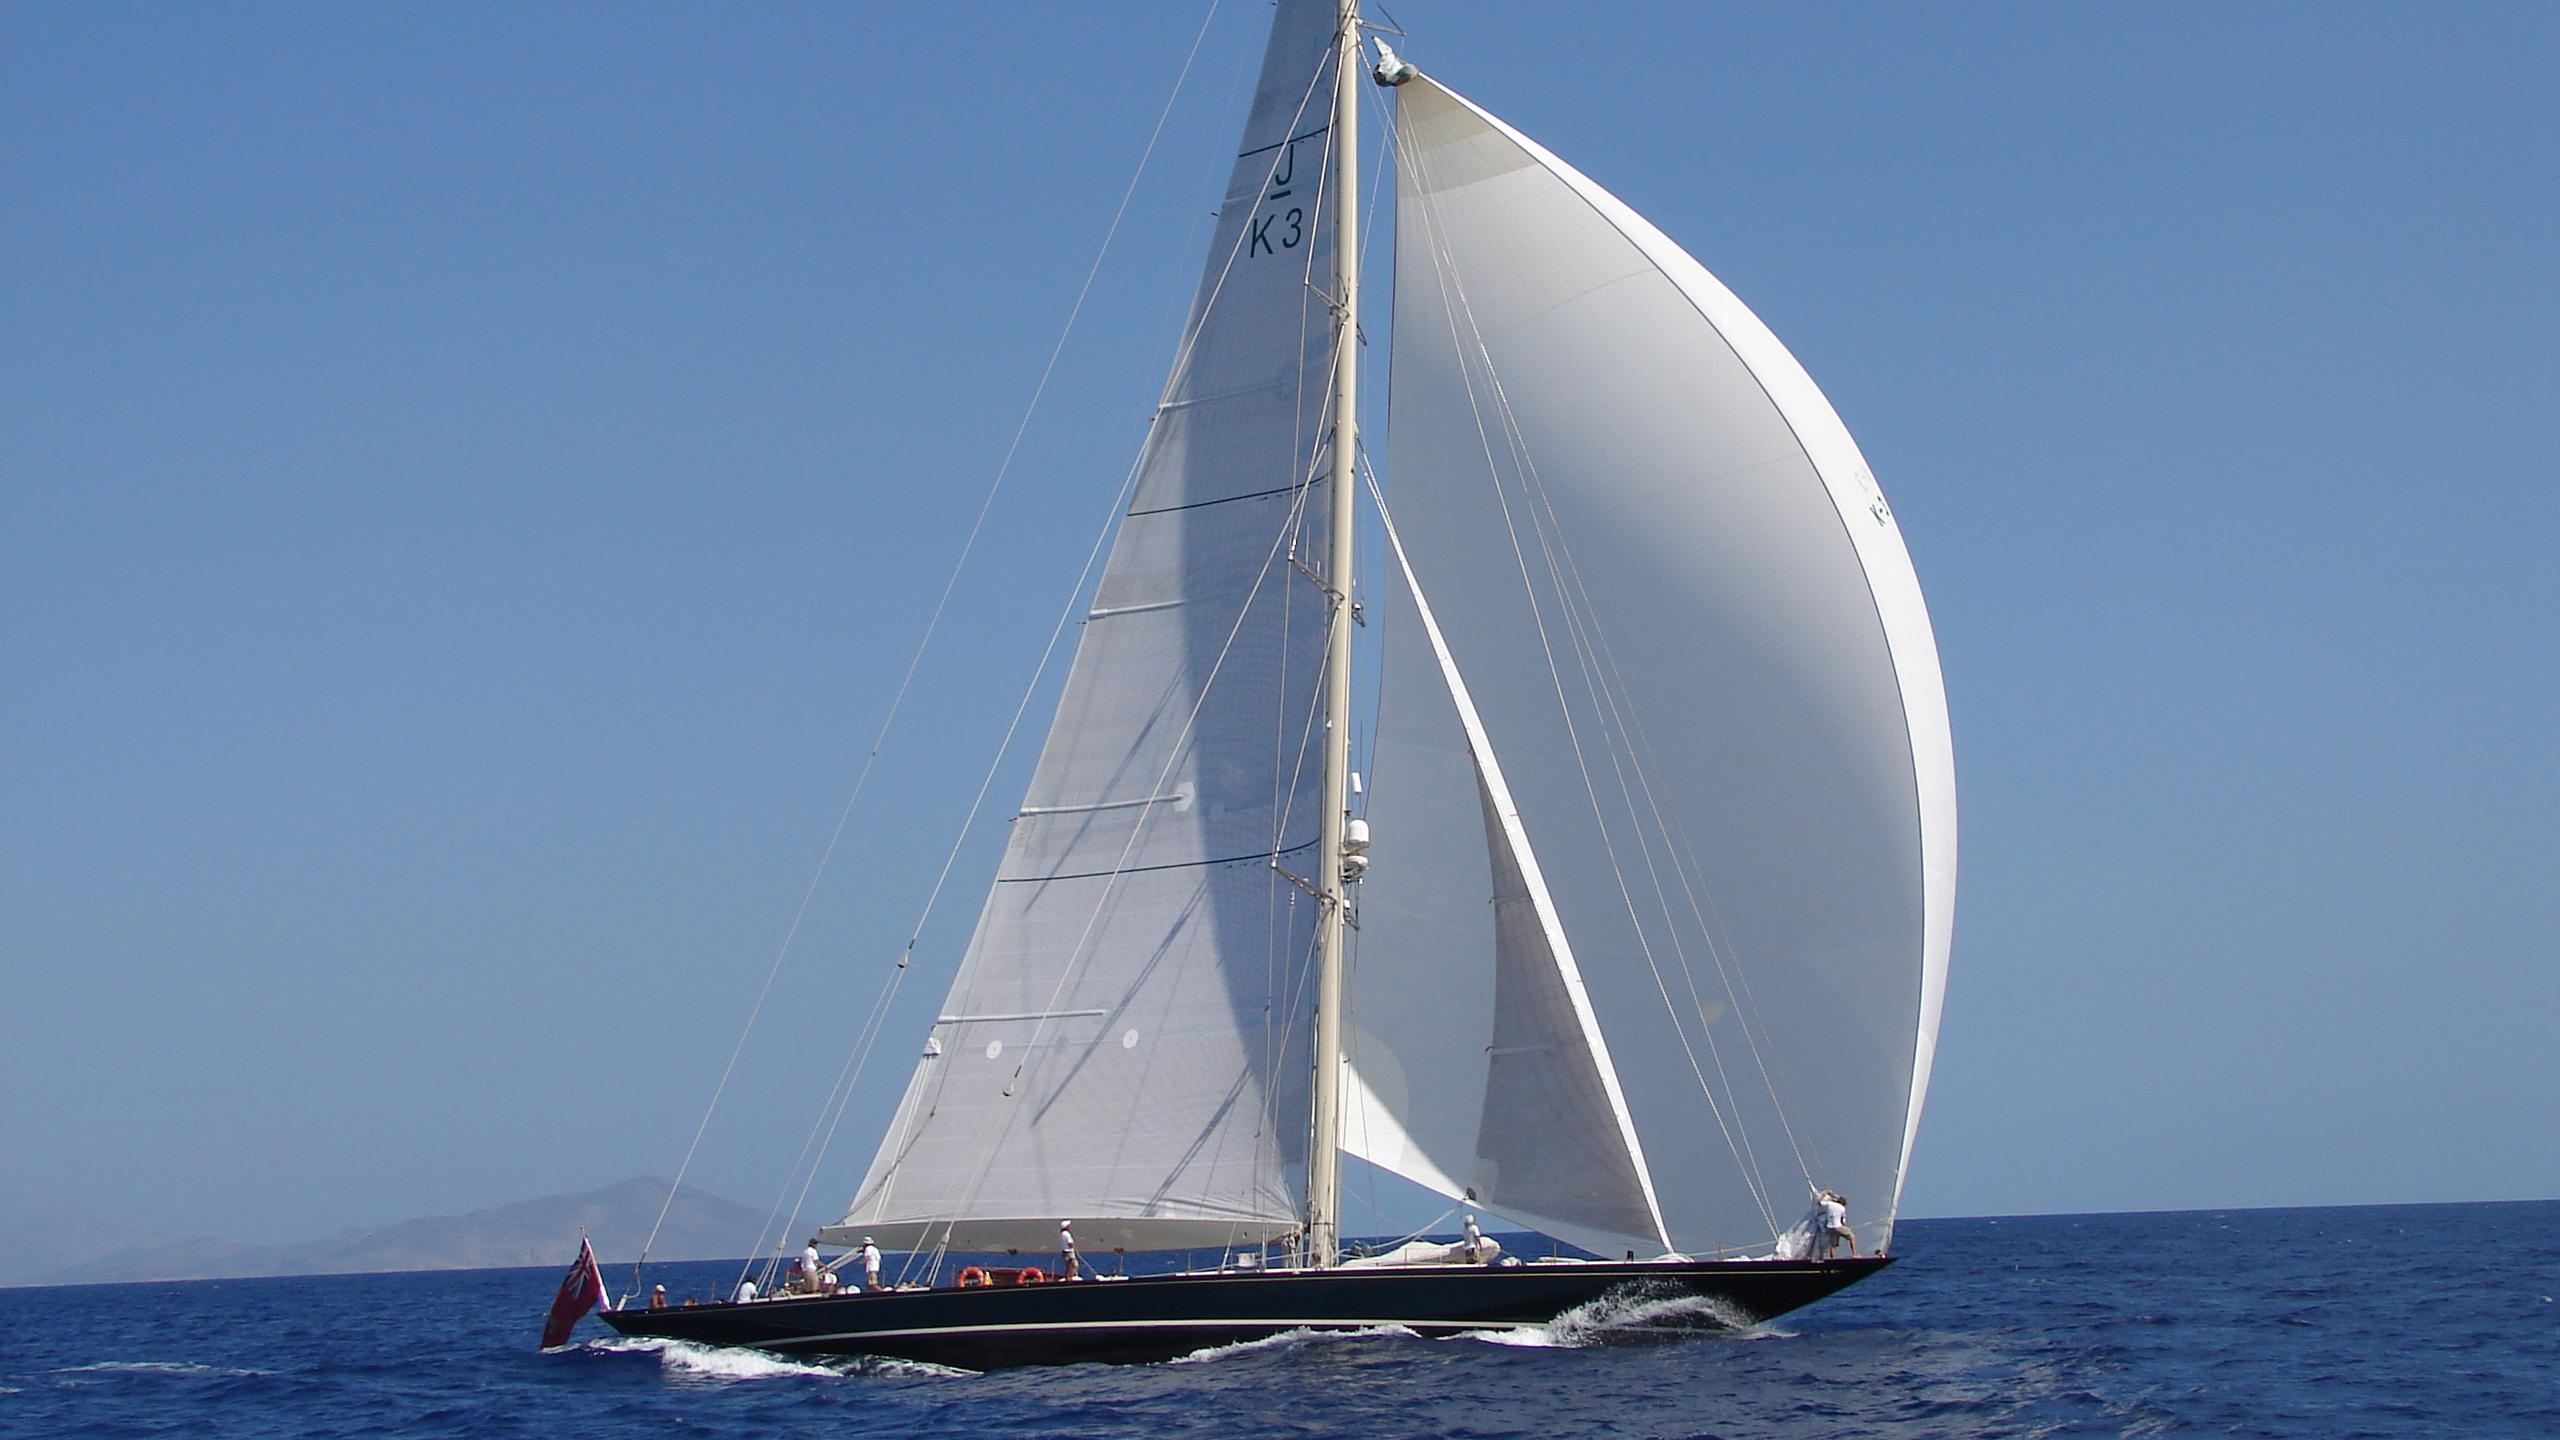 Sail Boat: Orion, A 44.99 m sail yacht, Built in the United Kingdom by Camper and Nicholsons. 2560x1440 HD Wallpaper.